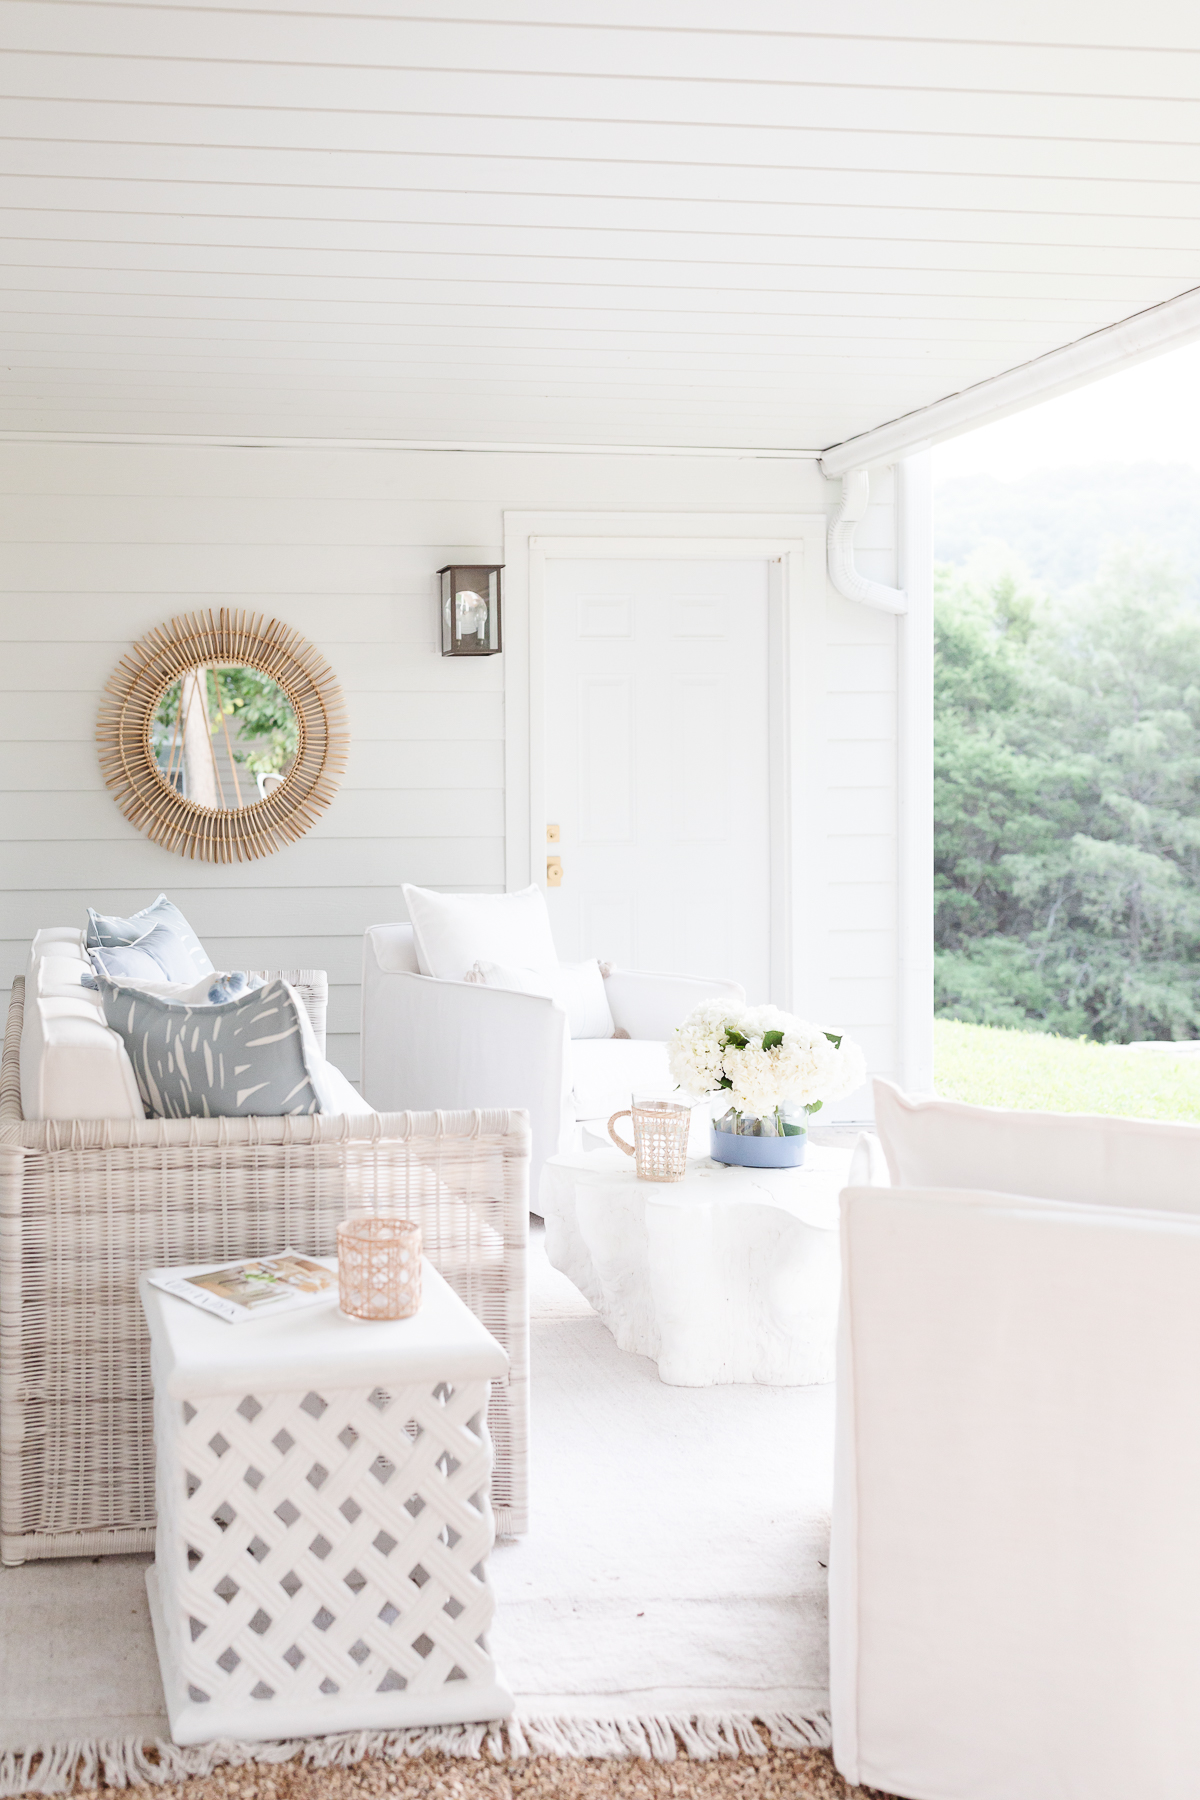 A white porch with wicker furniture and a mirror enhanced by an under deck ceiling.